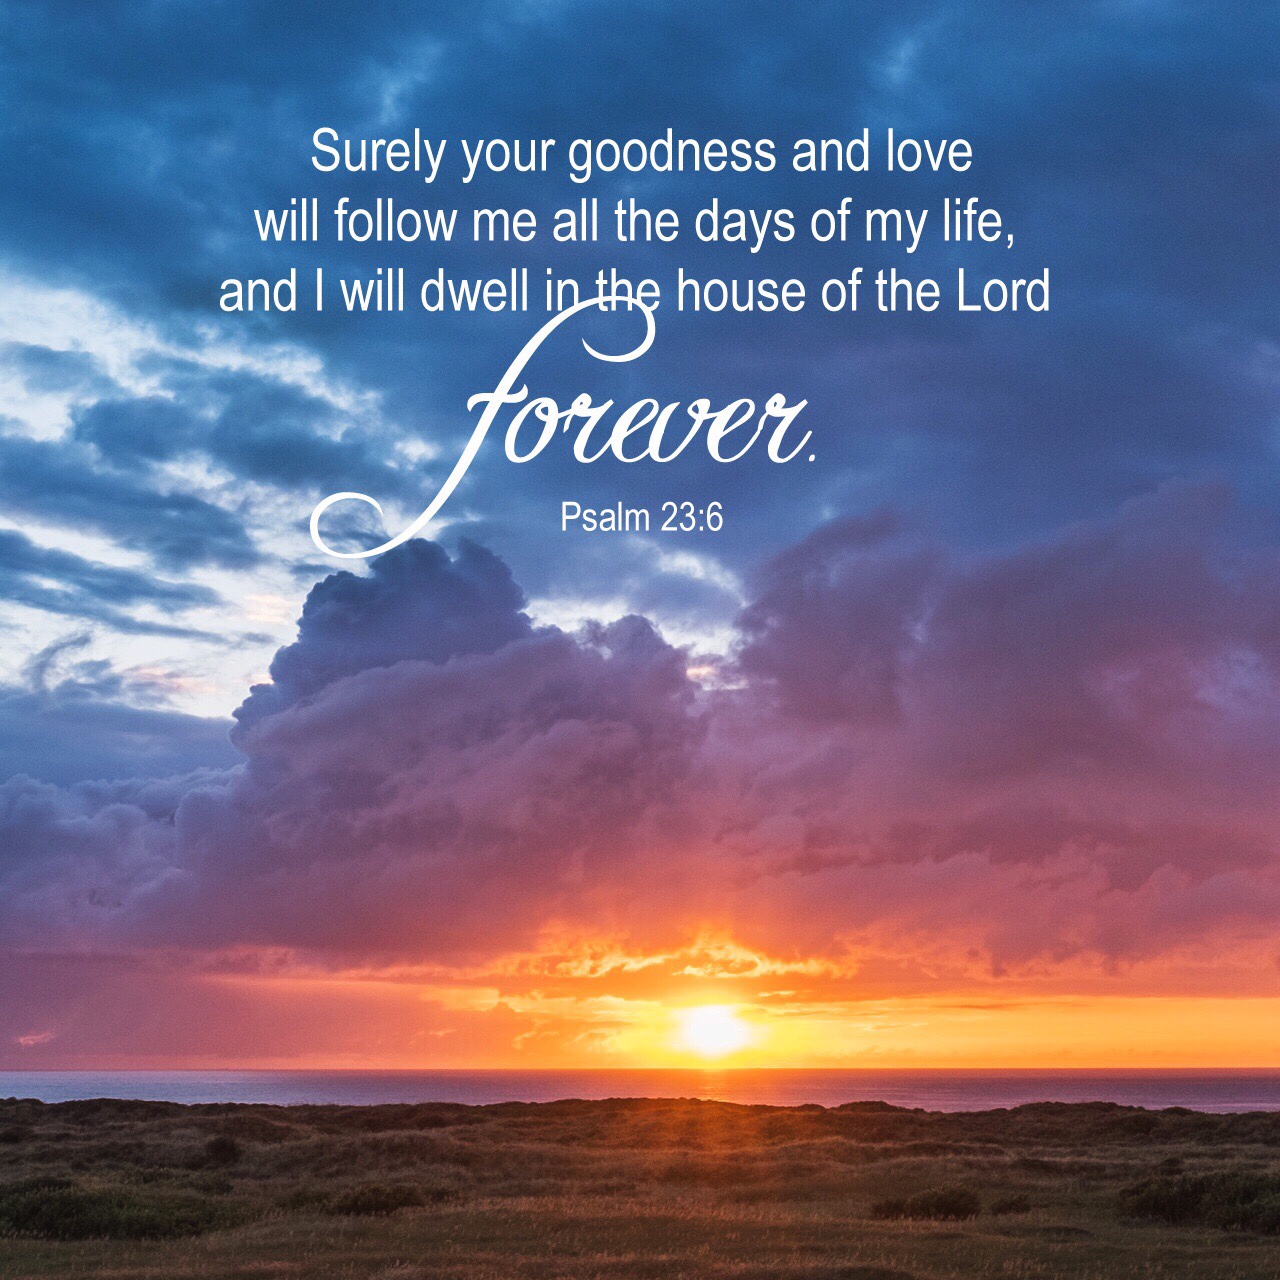 VOTD June 24, 2019 “Surely goodness and lovingkindness will follow me all the days of my life, And I will dwell in the house of the LORD forever.” ‭‭PSALM 23:6‬ ‭NASB‬‬